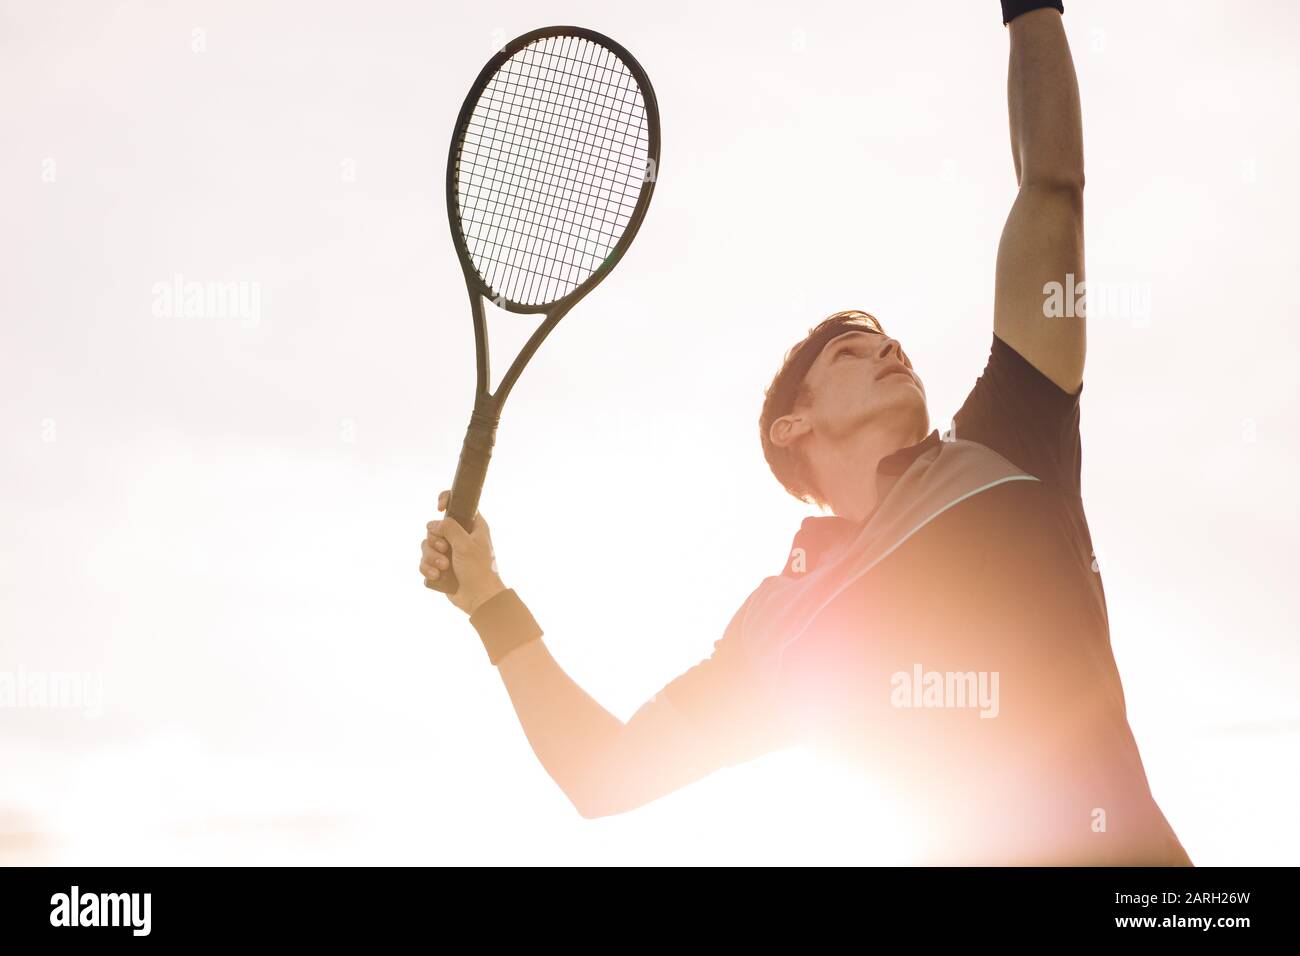 Young tennis player about to hit the ball on a sunny day. Professional tennis player making a serve with bright sunlight from behind. Stock Photo